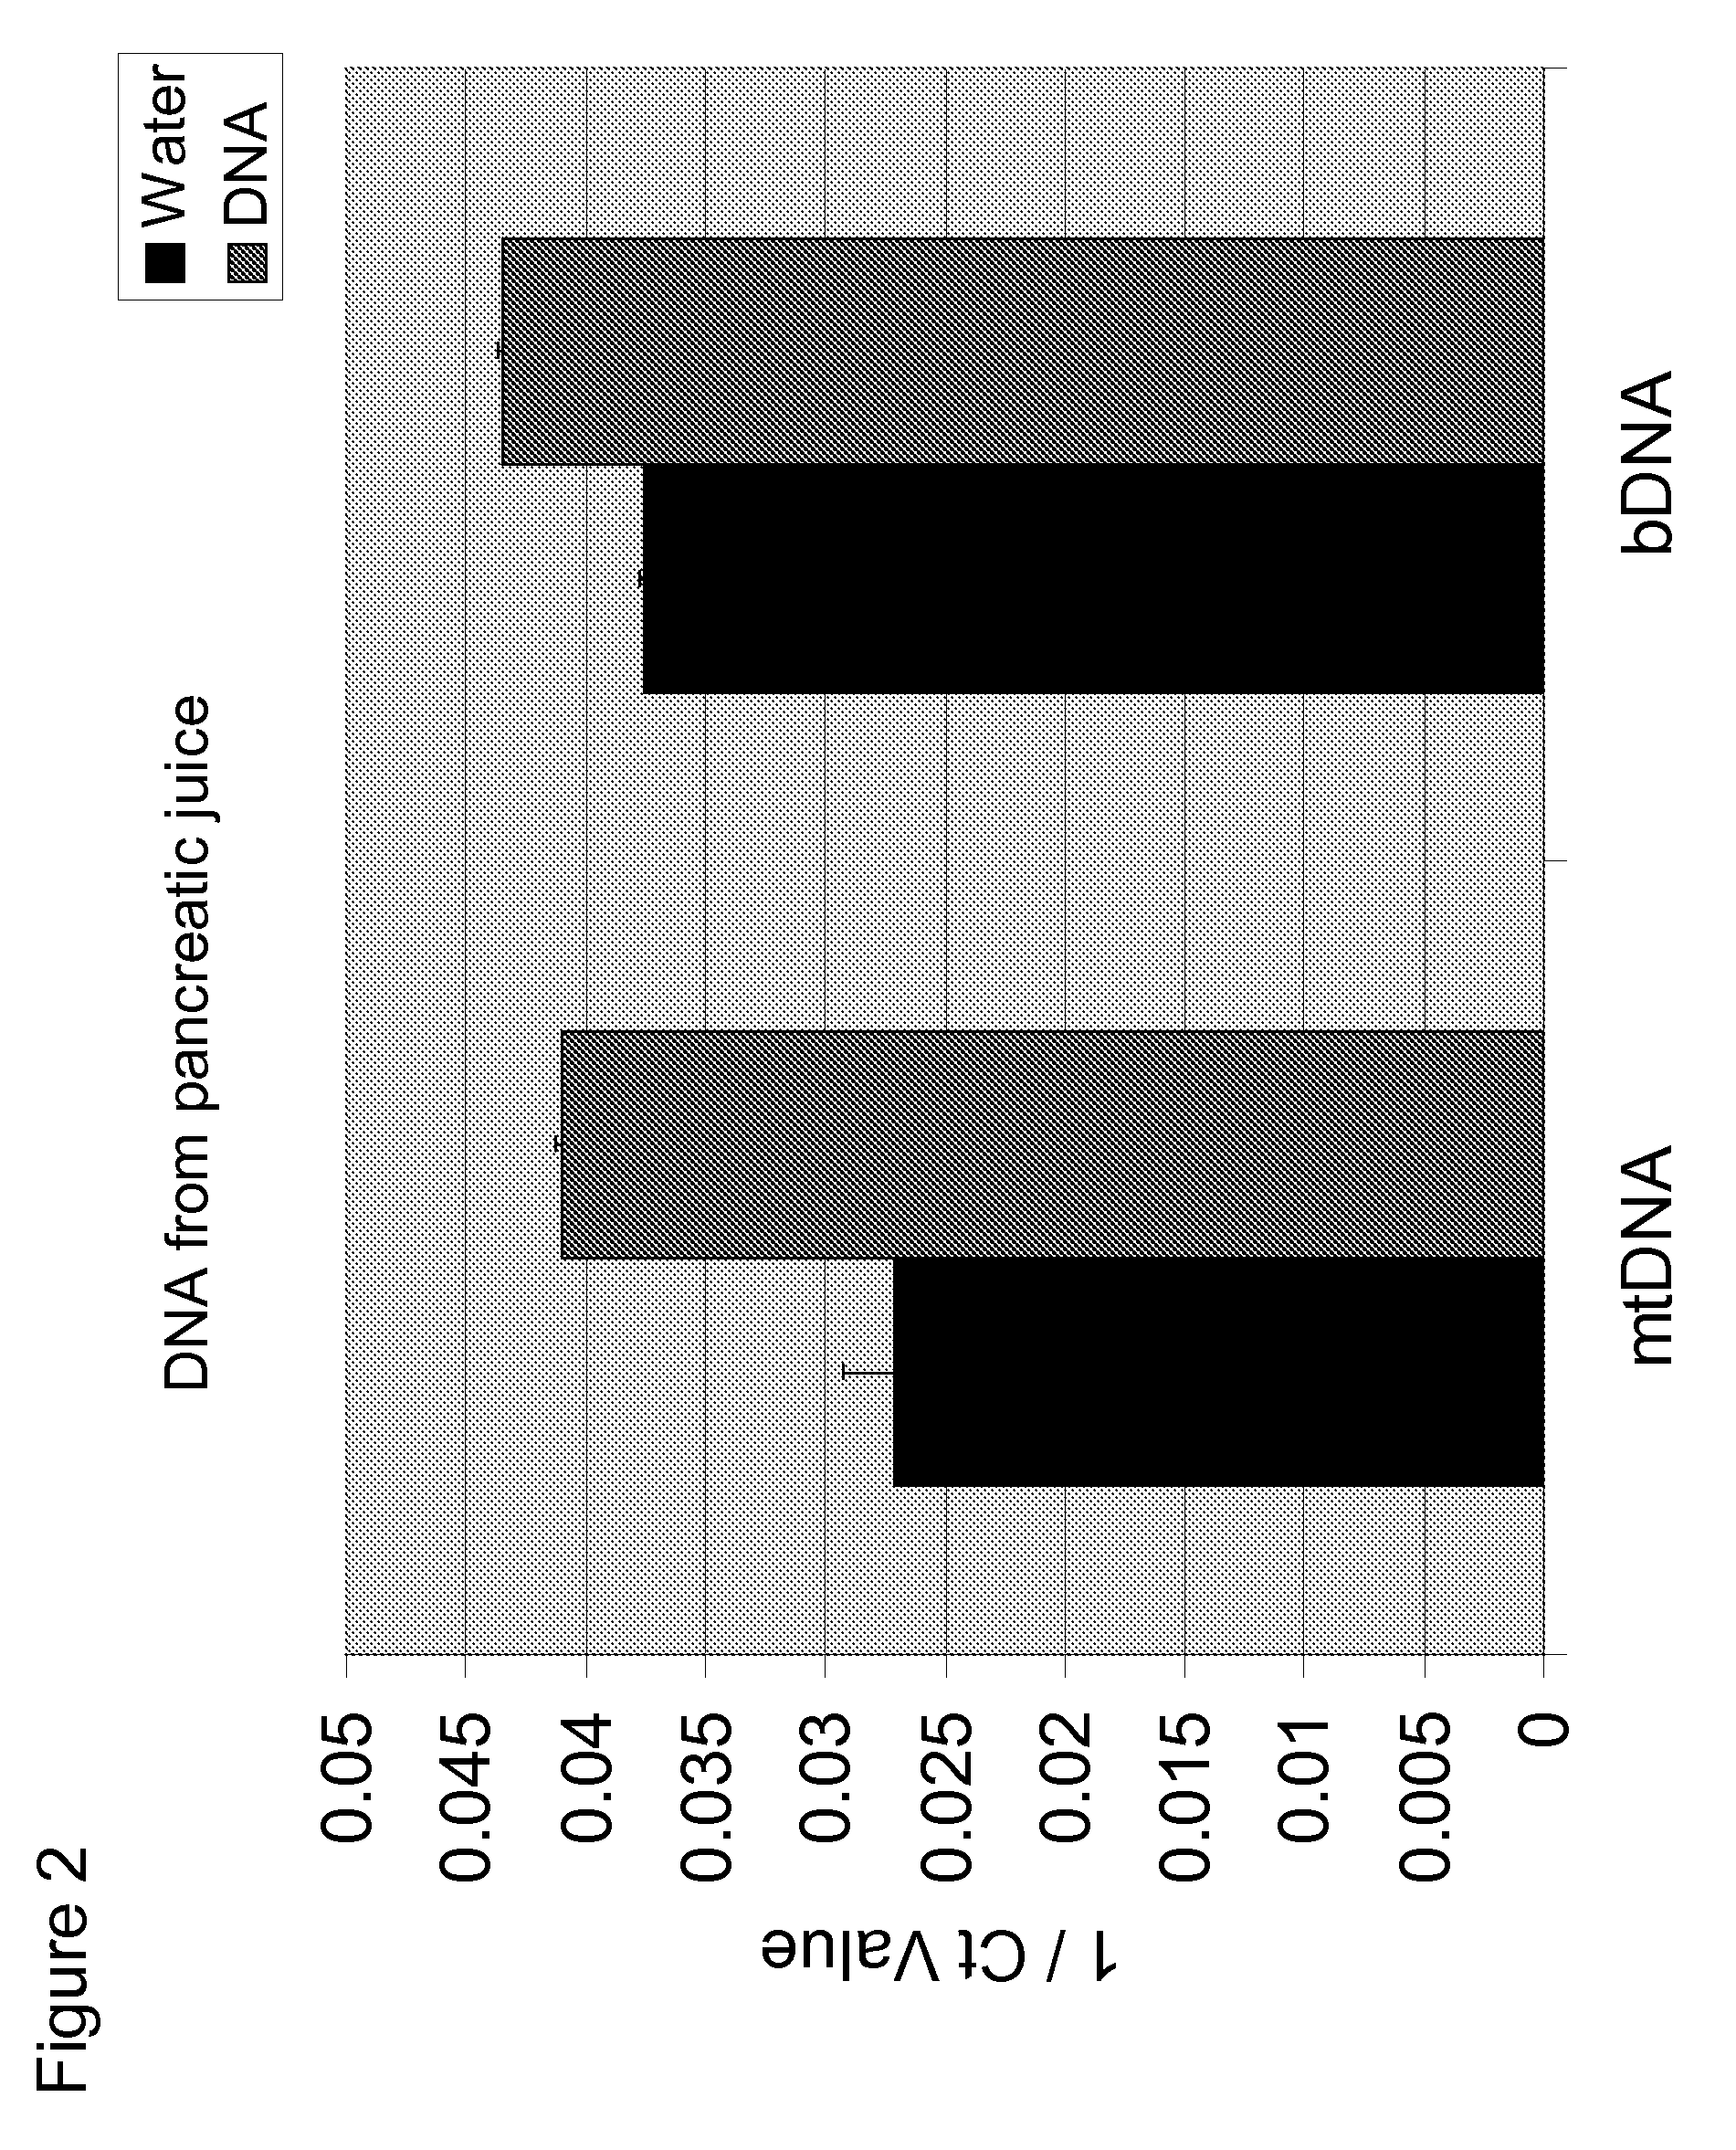 Methods for predicting and treating infection-induced illnesses and predicting the severity of infection-induced illnesses